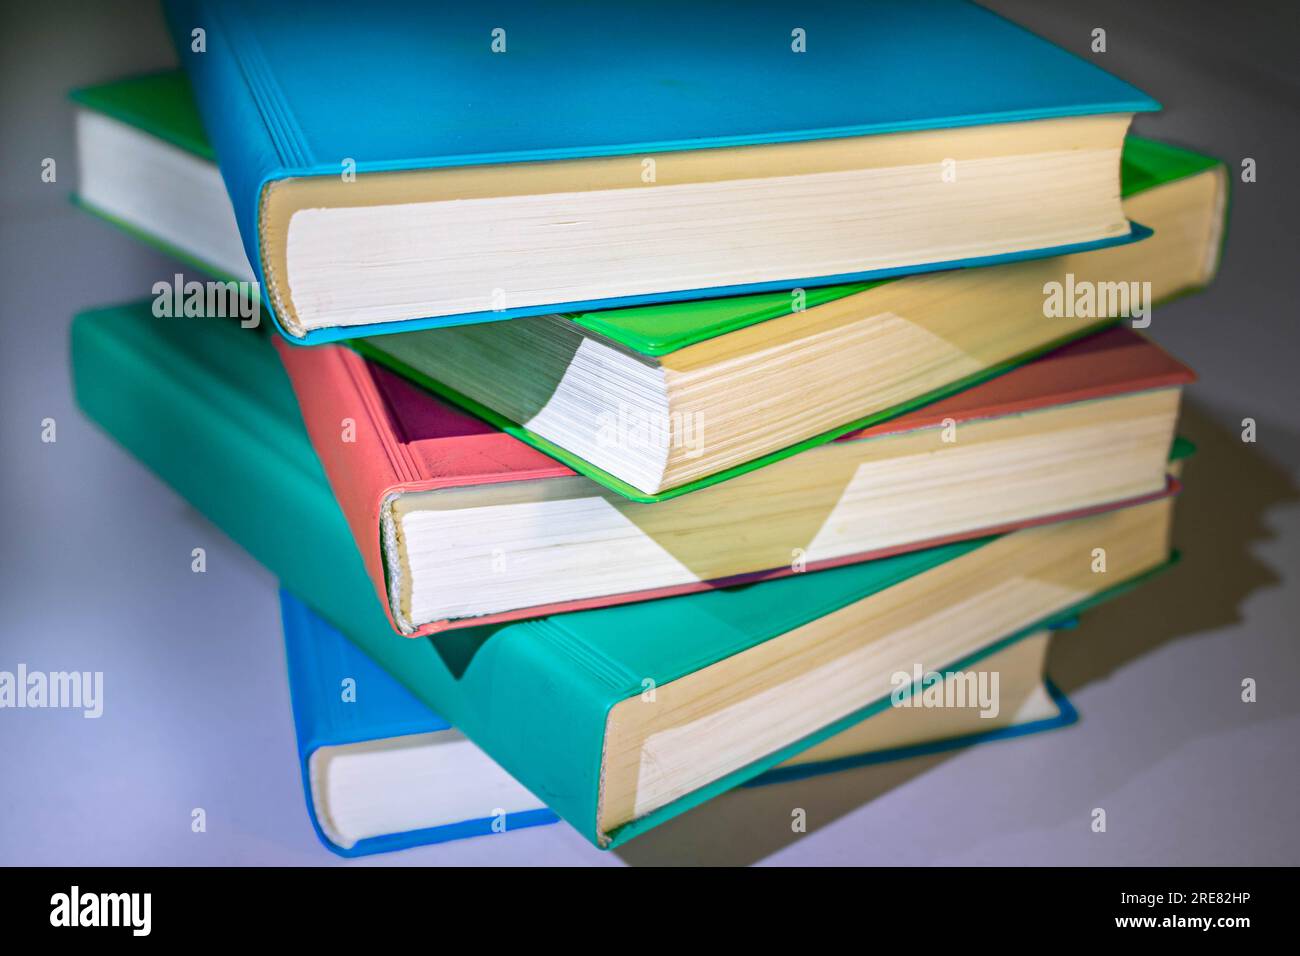 a colorful stack of 5 Books Stock Photo